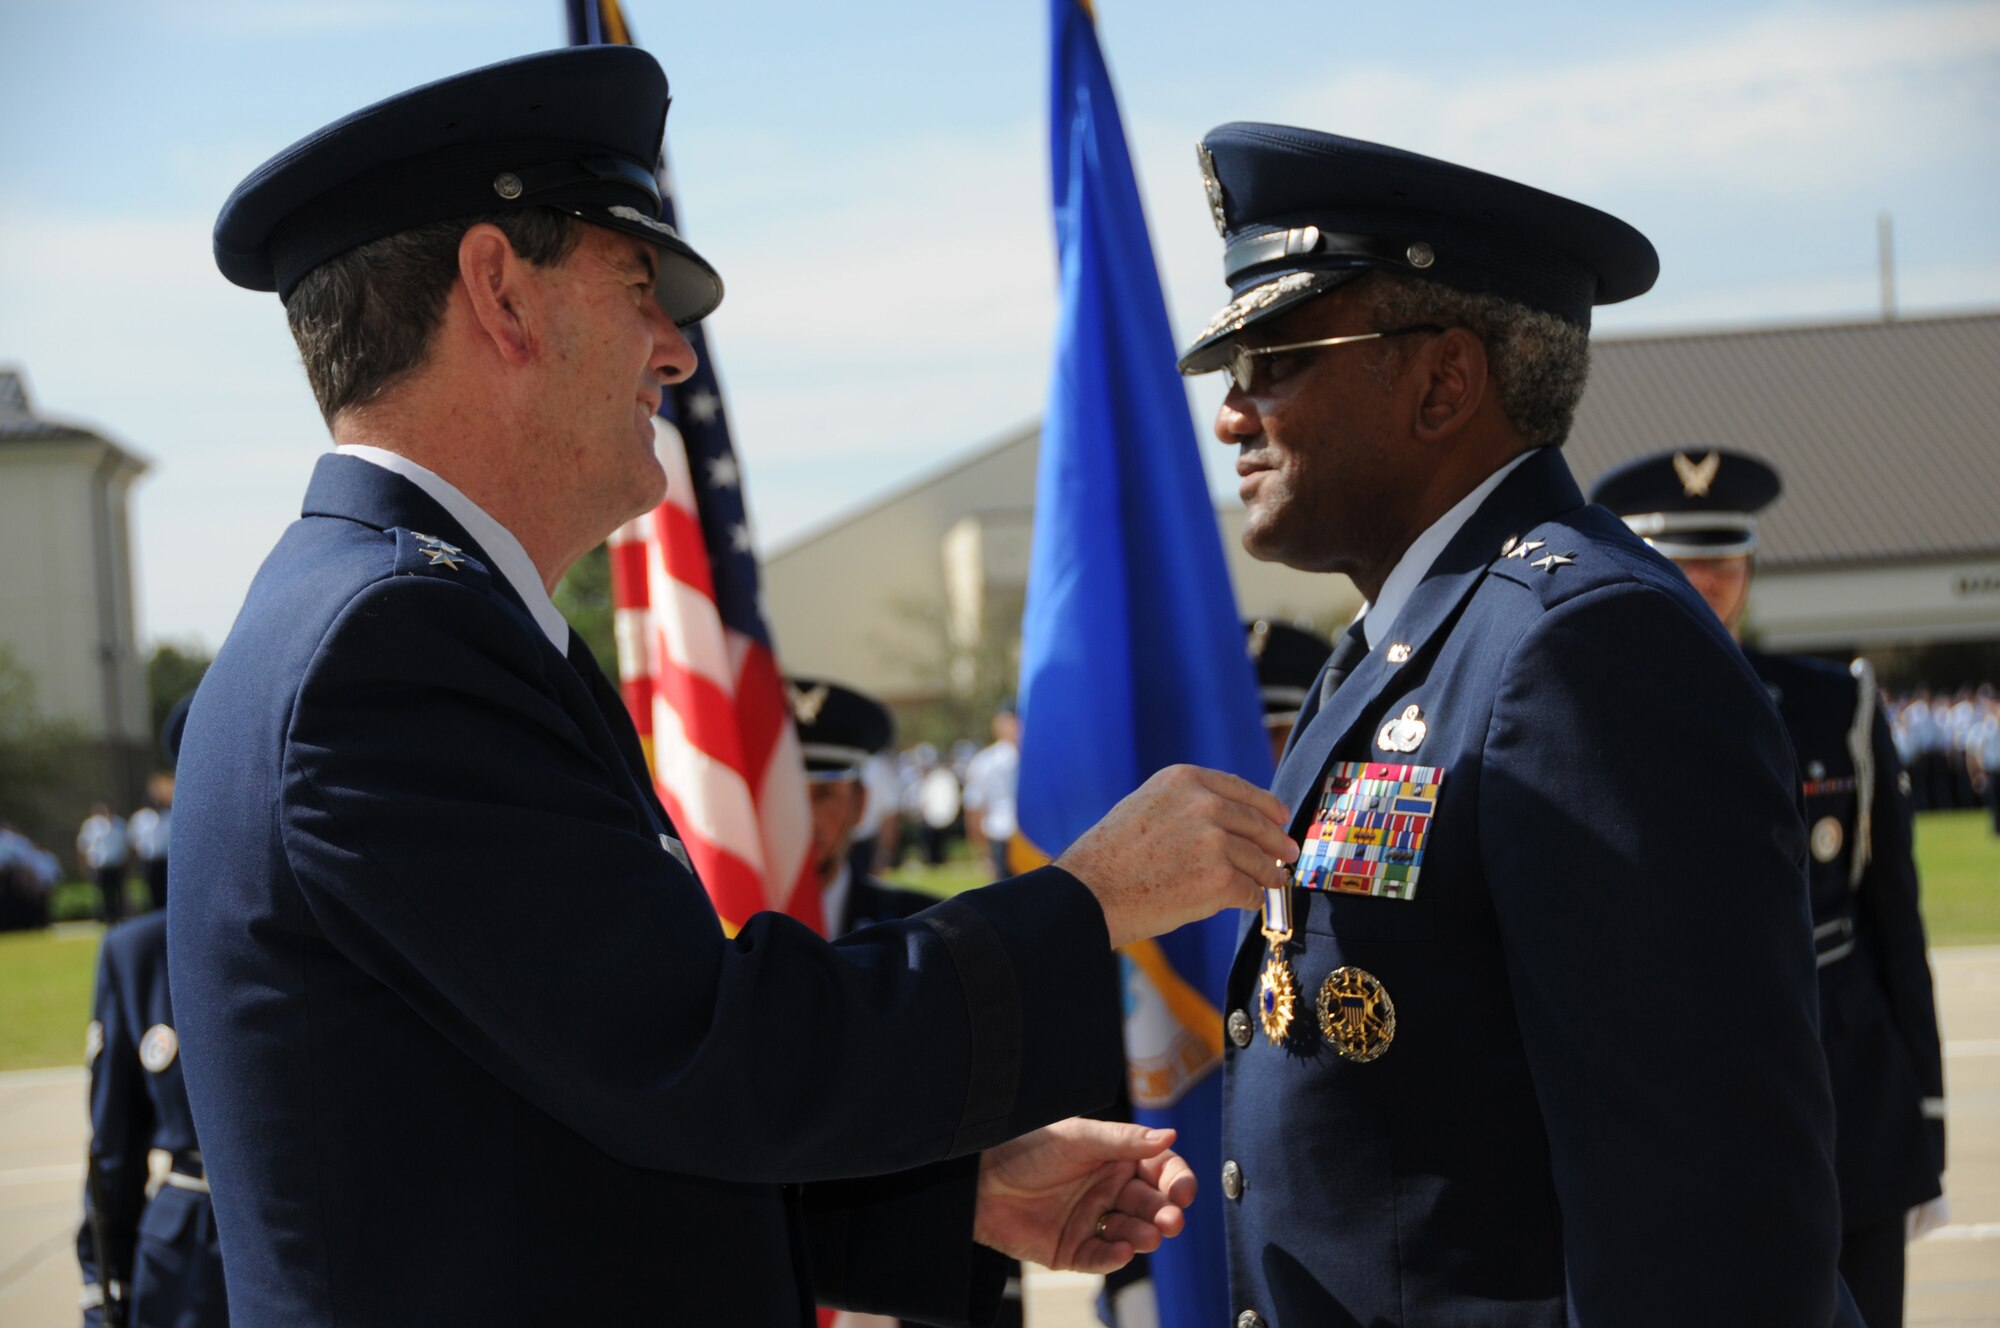 Brig. Gen. Ian Dickinson pins the Distinguished Service Medal on Maj. Gen. Alfred Flowers during the 2nd Air Force change of command here Sept. 9. Maj. Gen. Mary Kay Hertog took command of 2nd Air Force from General Flowers at the Levitow Parade Field.  (U.S. Air Force photo by Kemberly Groue)
